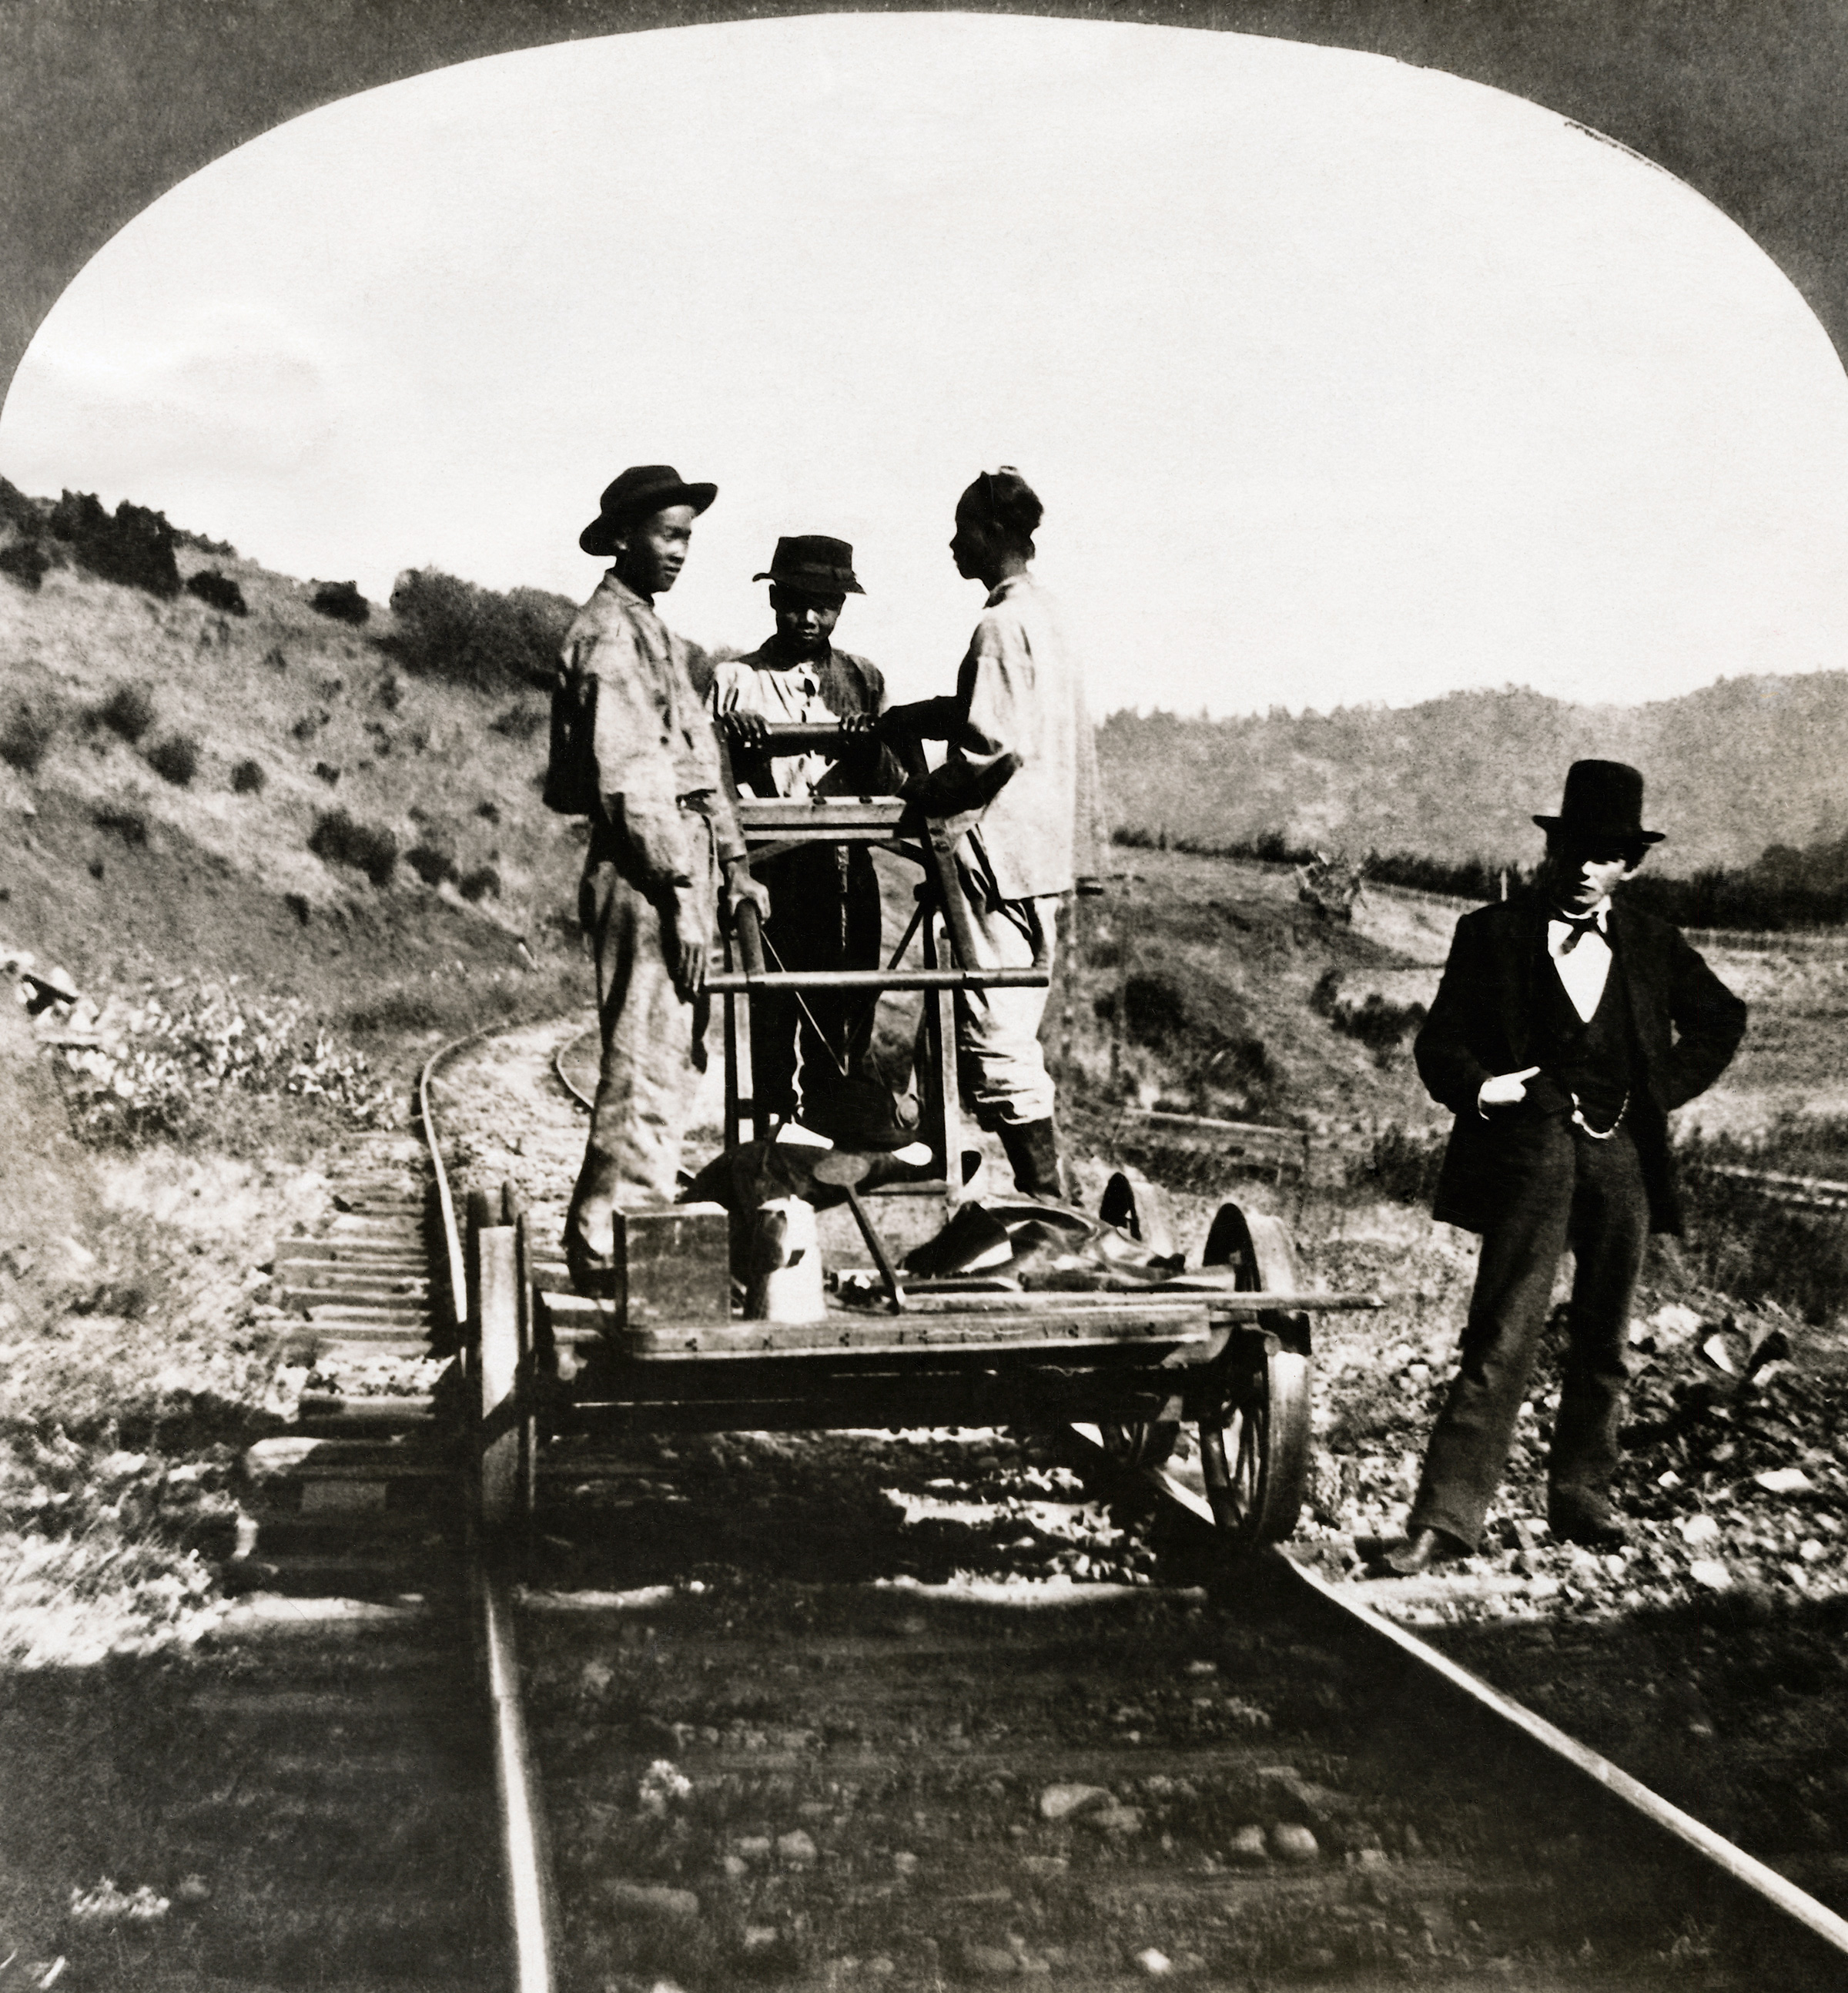 In early California, thousands of Chinese immigrants were employed by the railroads to do the toughest work; circa 1890